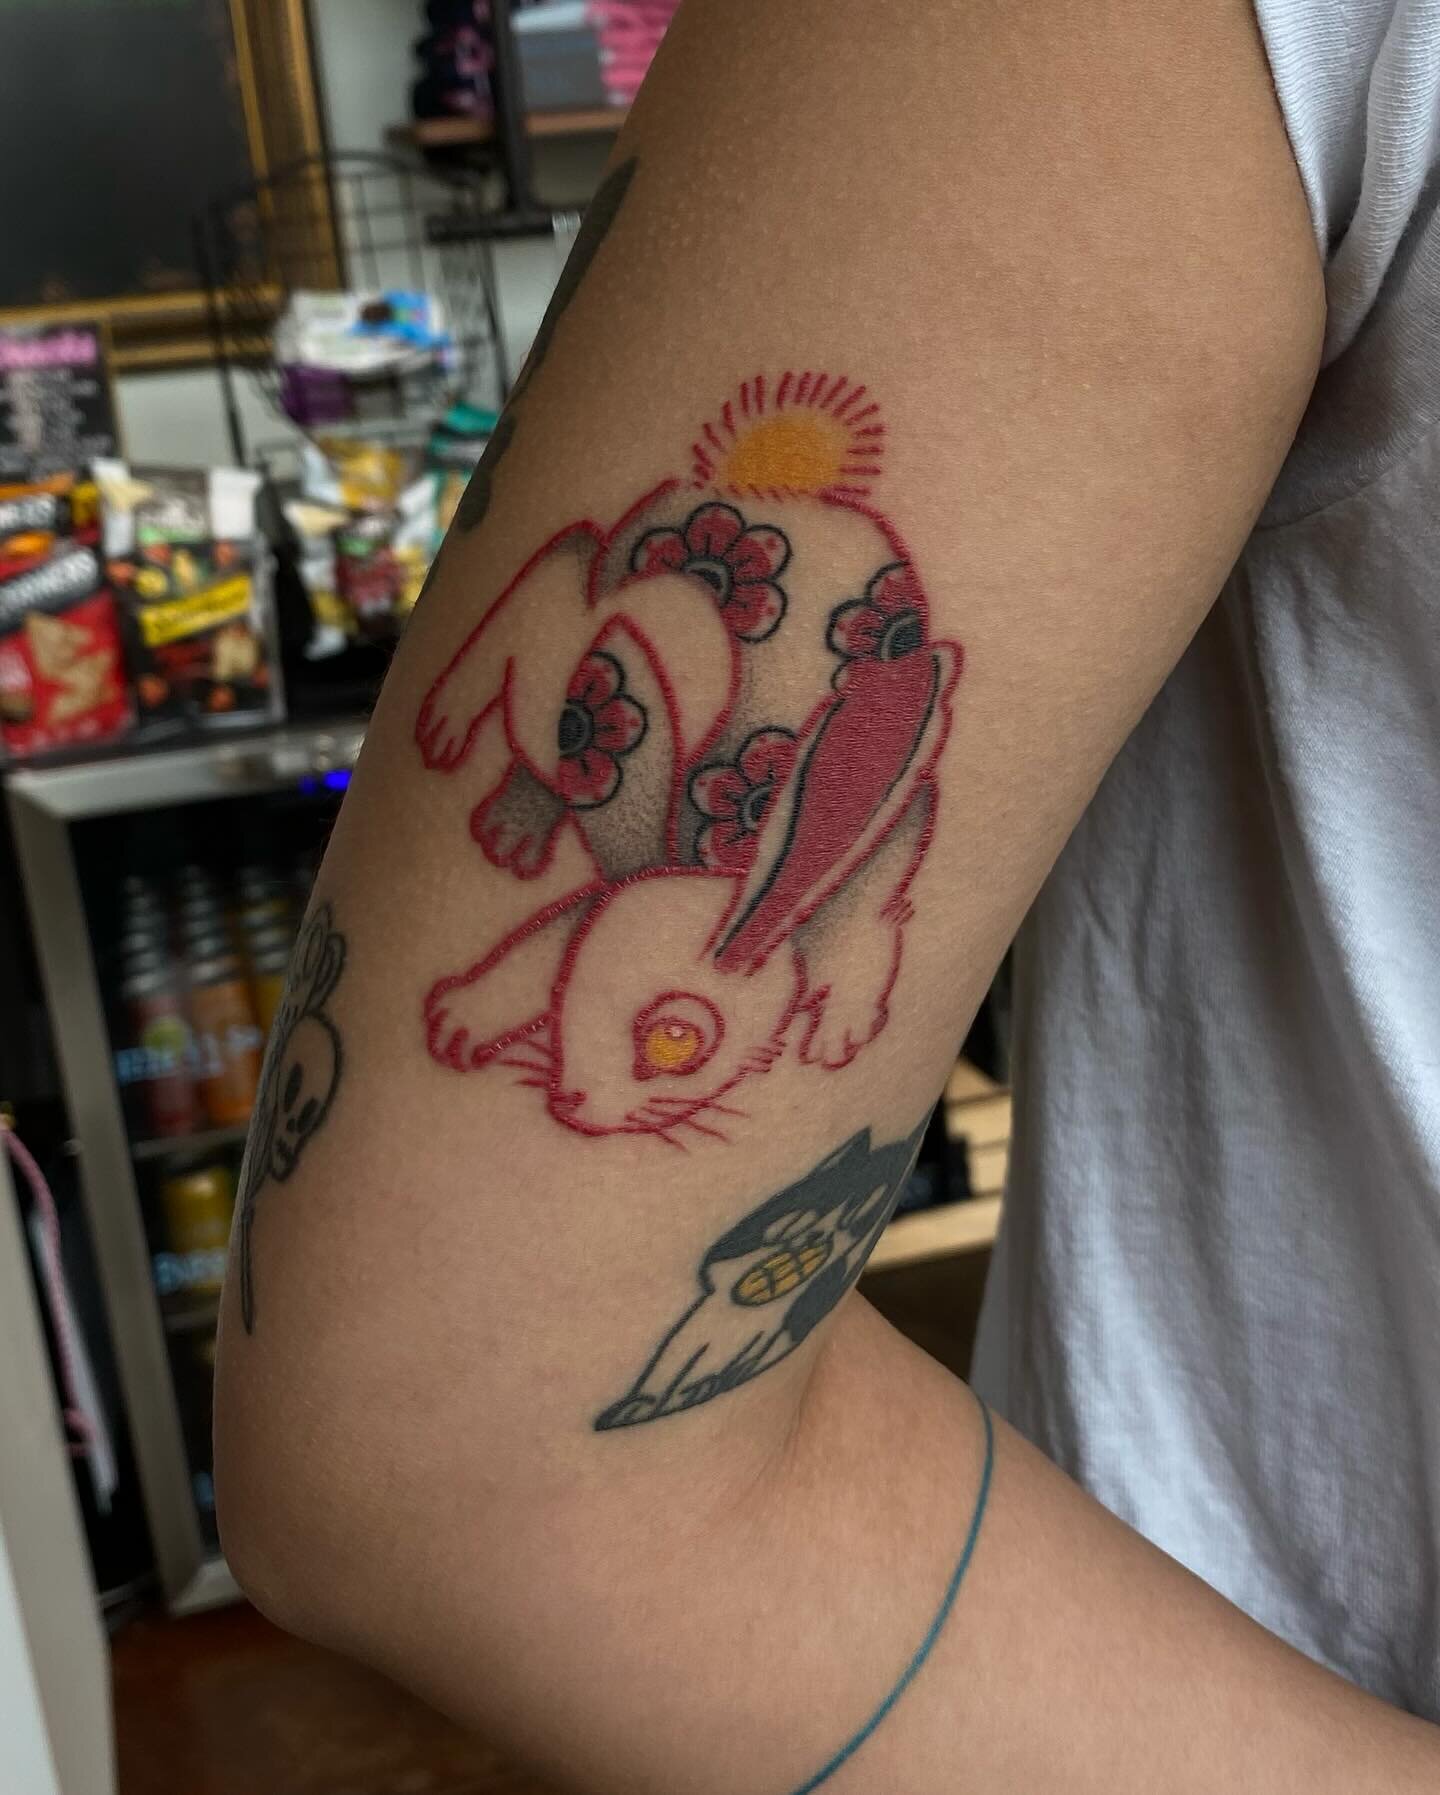 Healed/Healing color tatties for tawni :) + fresh fingies 

My books are open for April/May!! Link in bio for Consultations, or DM :) thanks for looking ❤️🖤❤️